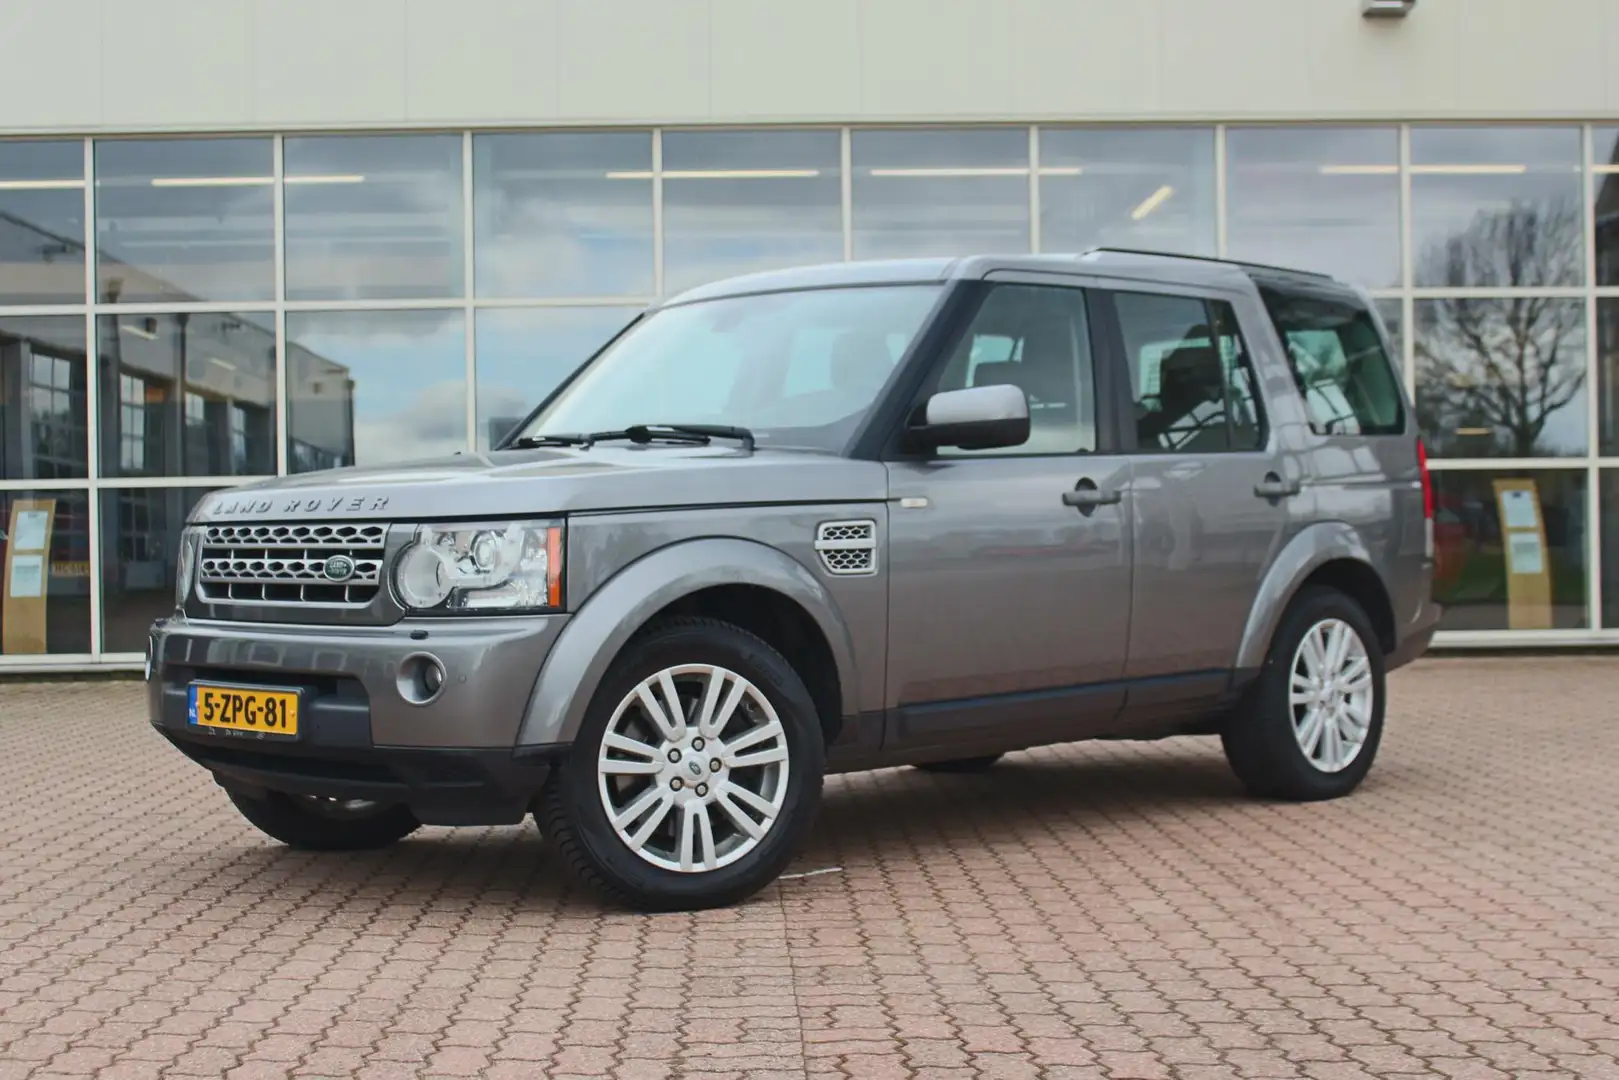 Land Rover Discovery 3.0 SDV6 HSE 7 -Seater Grijs - 2